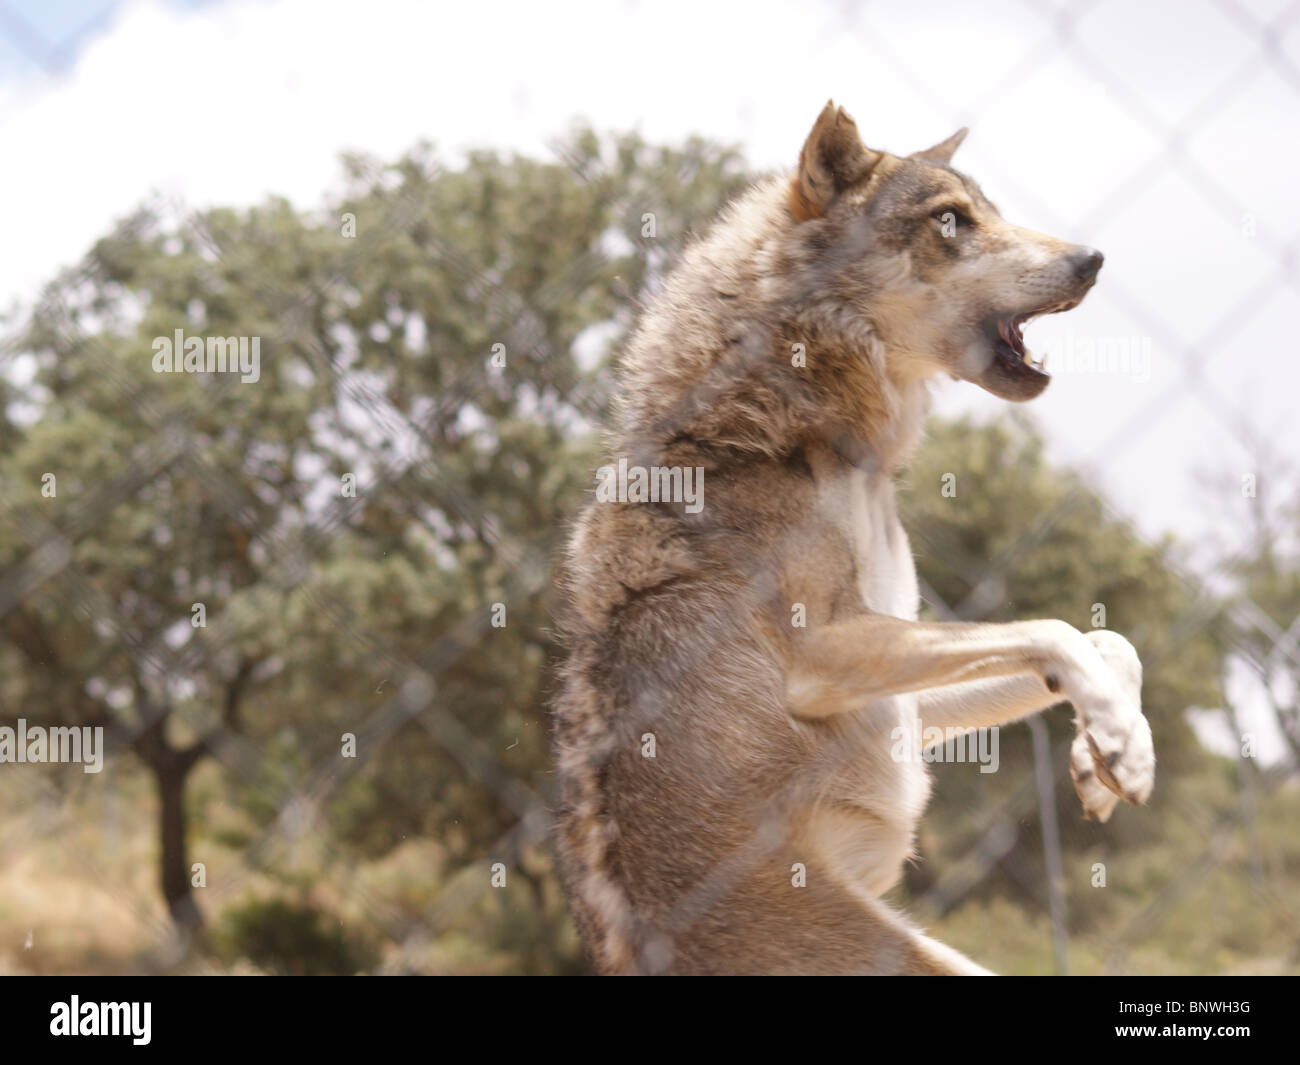 WILD WOLF AT LOBO PARK ANTEQUERA ANDALUCIA SPAIN EUROPE ON HIND LEGS Stock Photo